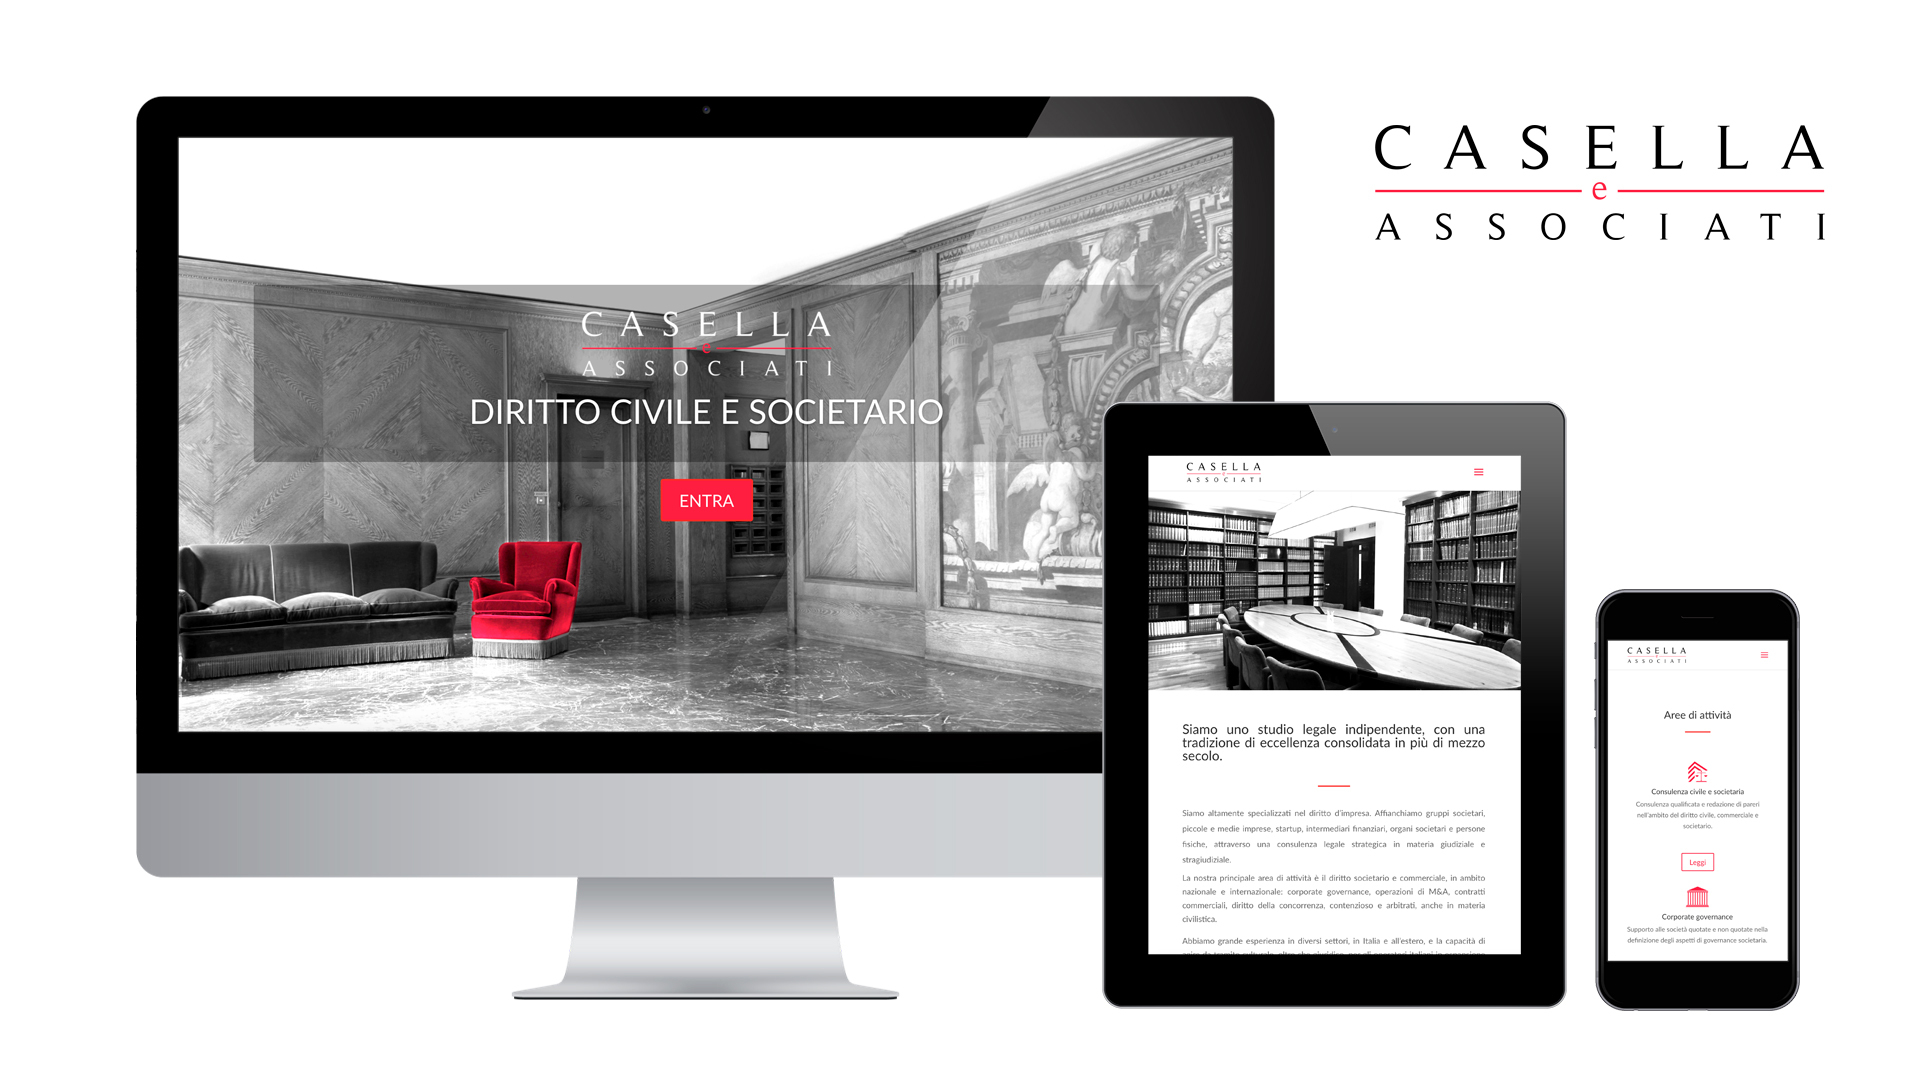 Casella and Associates Law Firm